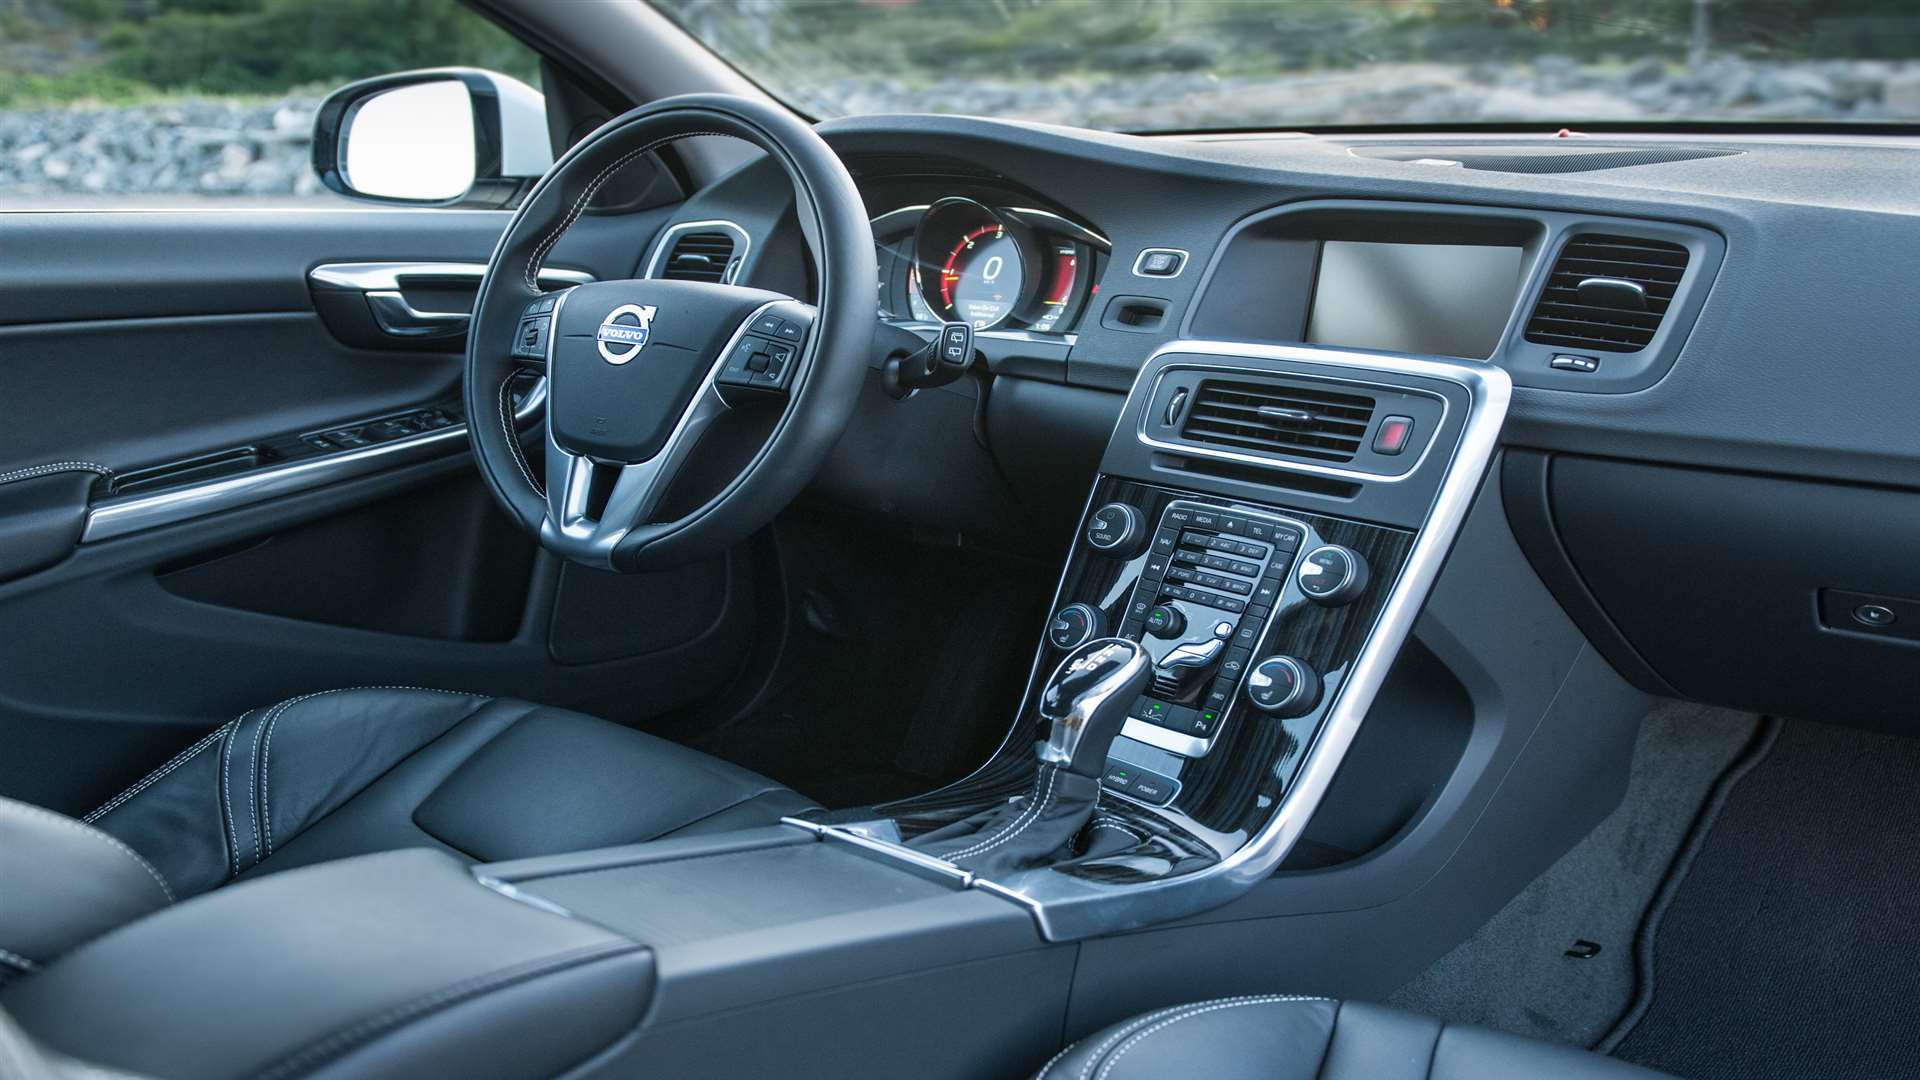 The interior is largely unchanged from the rest of the range